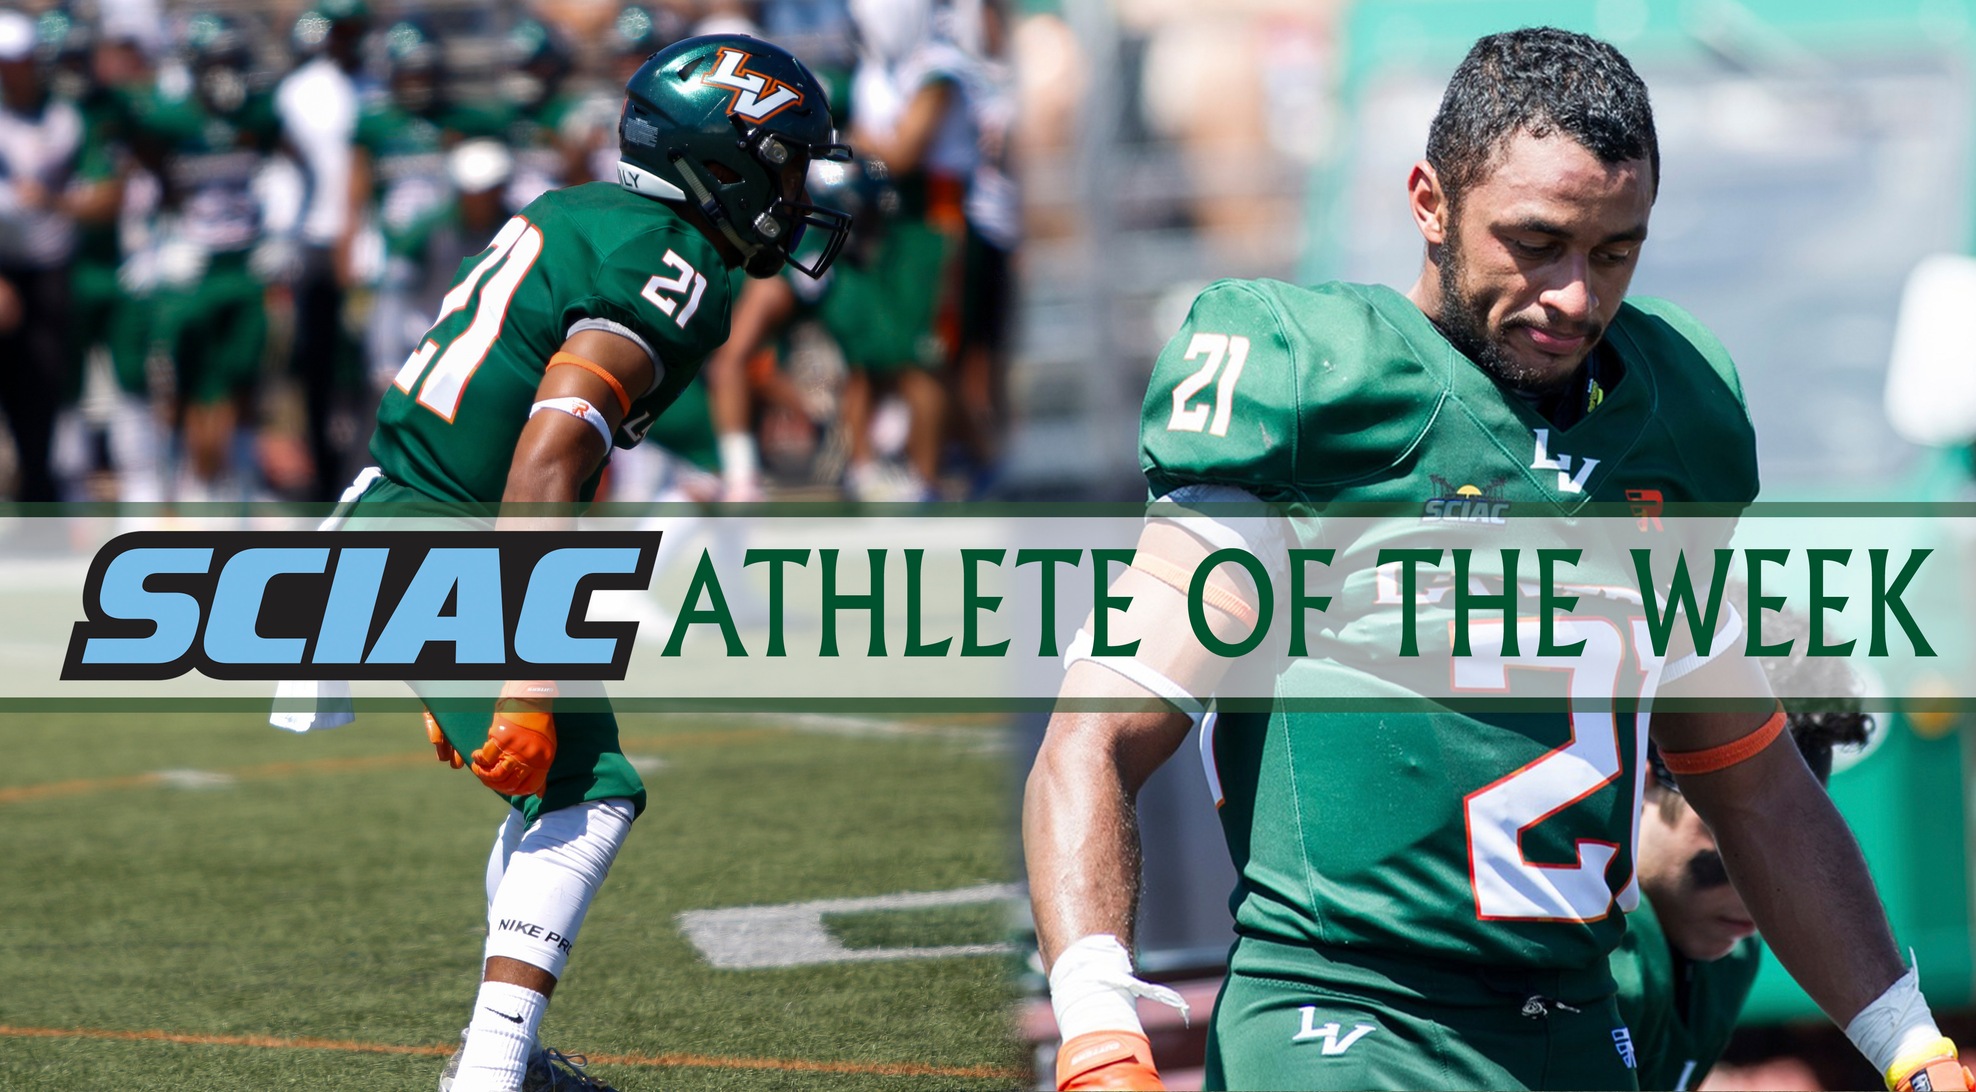 Franklin Named SCIAC Athlete of the Week